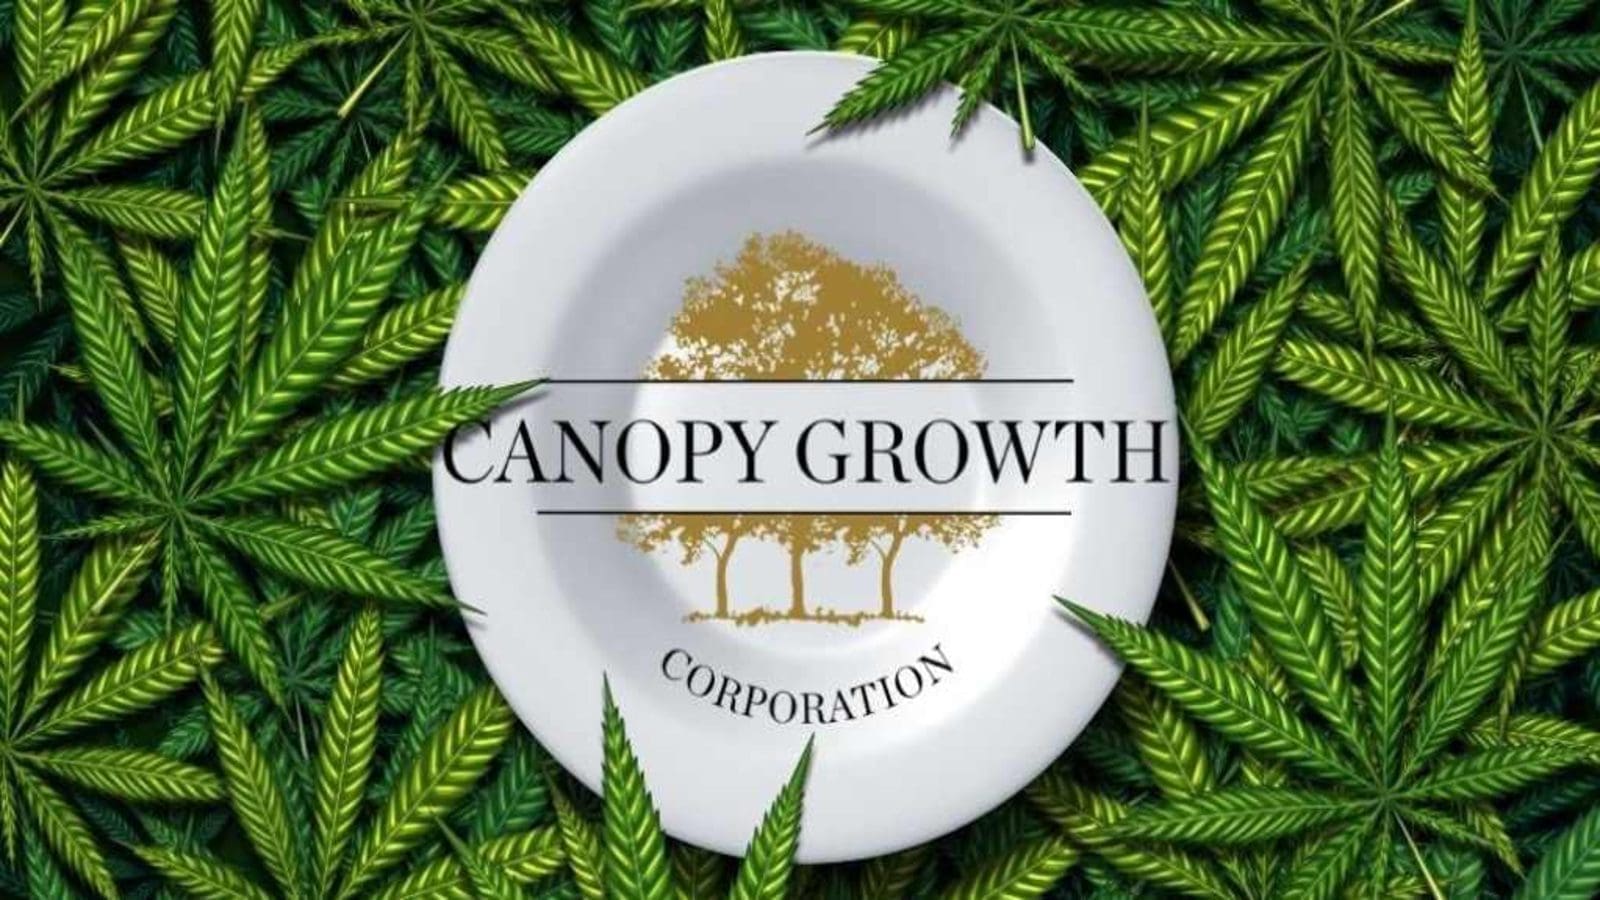 Constellation Brands is bullish on Canopy Growth picking pace to profitability